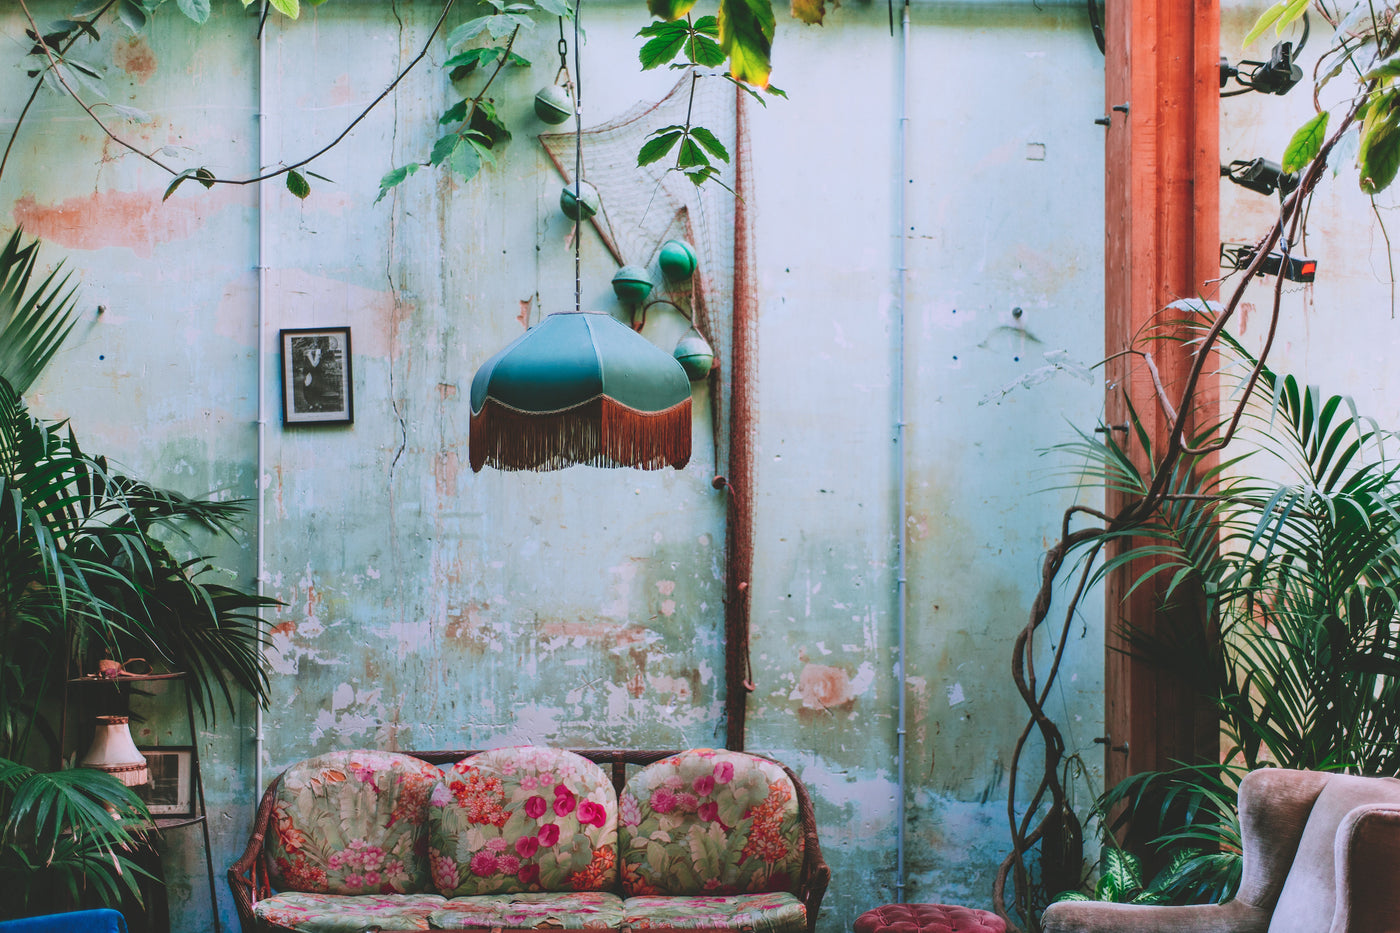 Vintage decoration of the living room with colorful sofa next to the plants